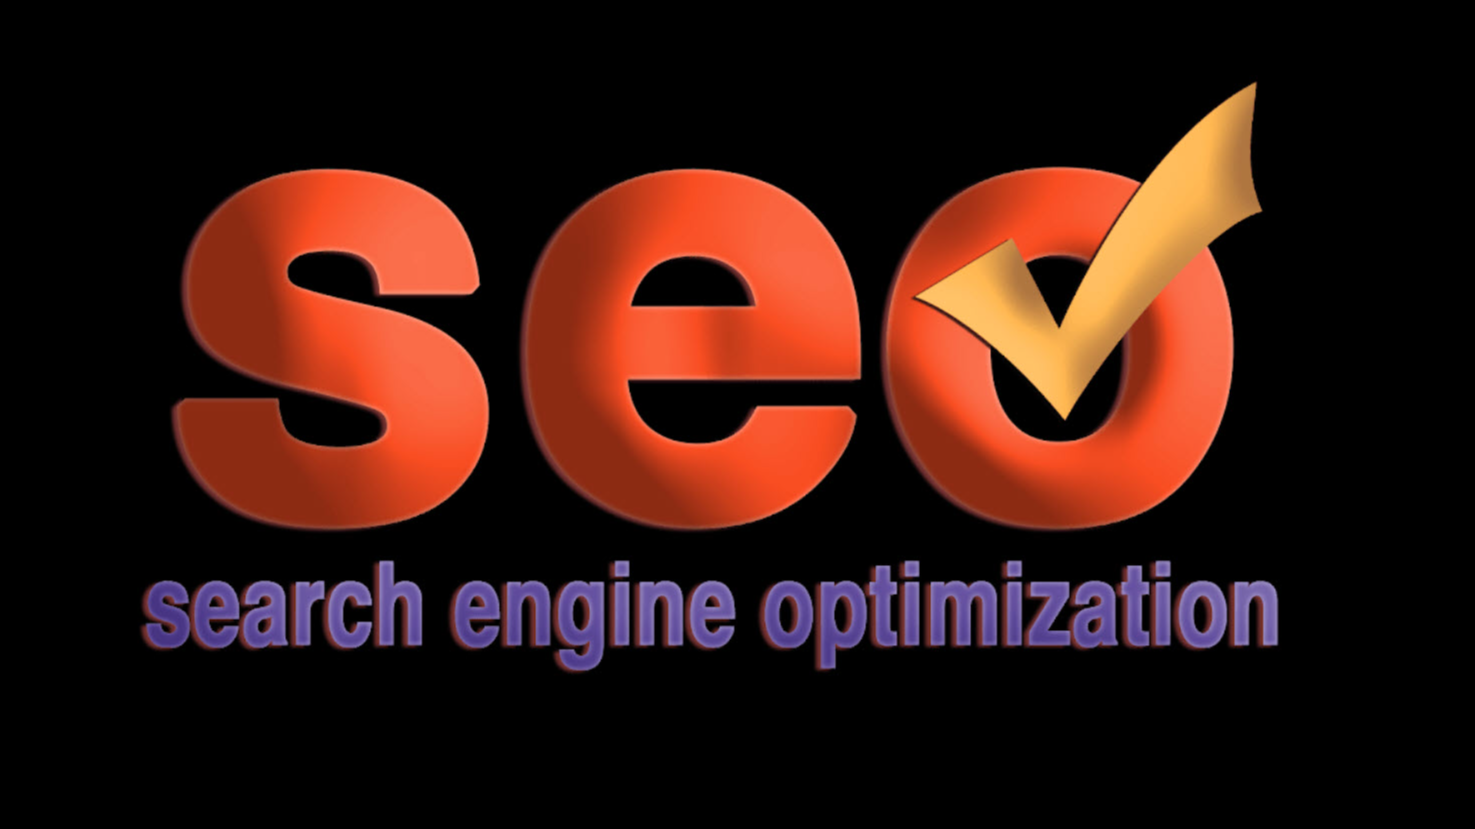 Hire Page One Ranked SEO Agency For Your New Orleans Real Estate Agency Campaign